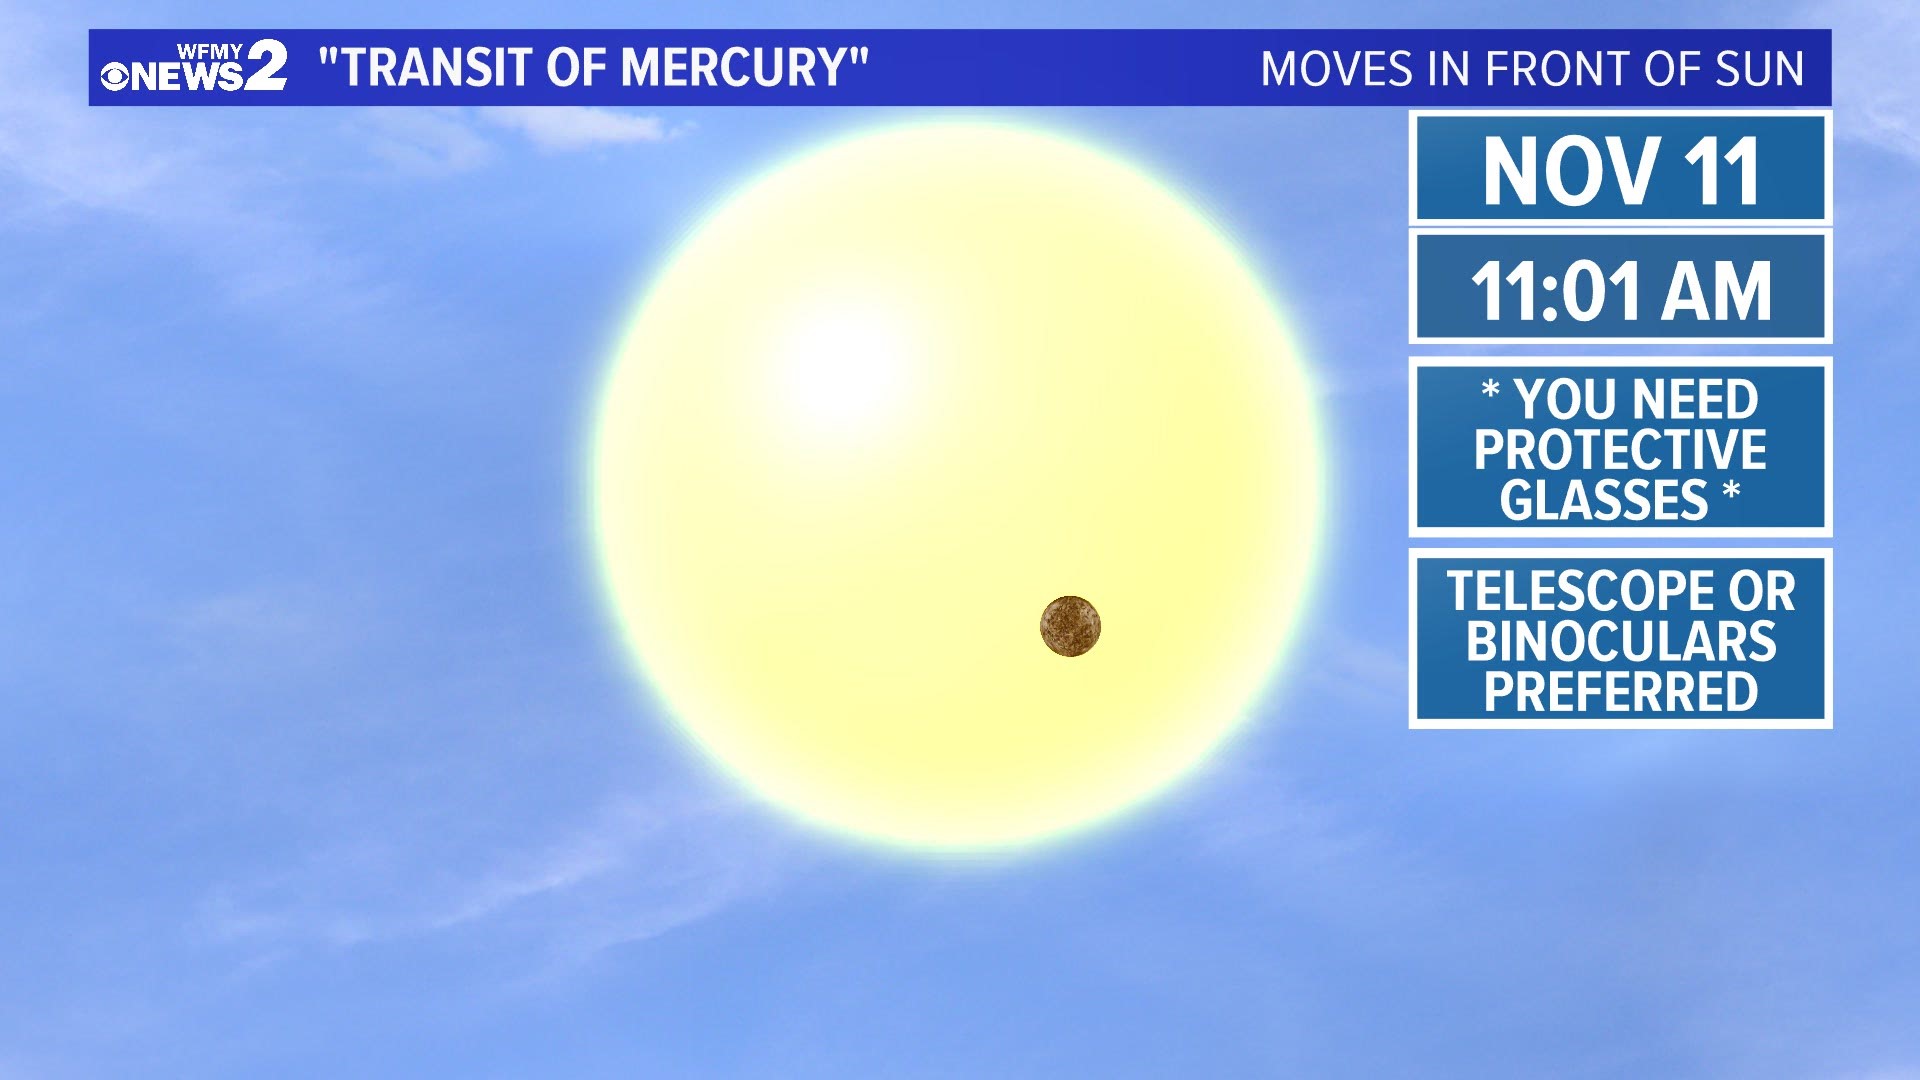 A small black dot will pass in front of the sun on Monday; it's Mercury. You'll need protective glasses and a telescope to see.